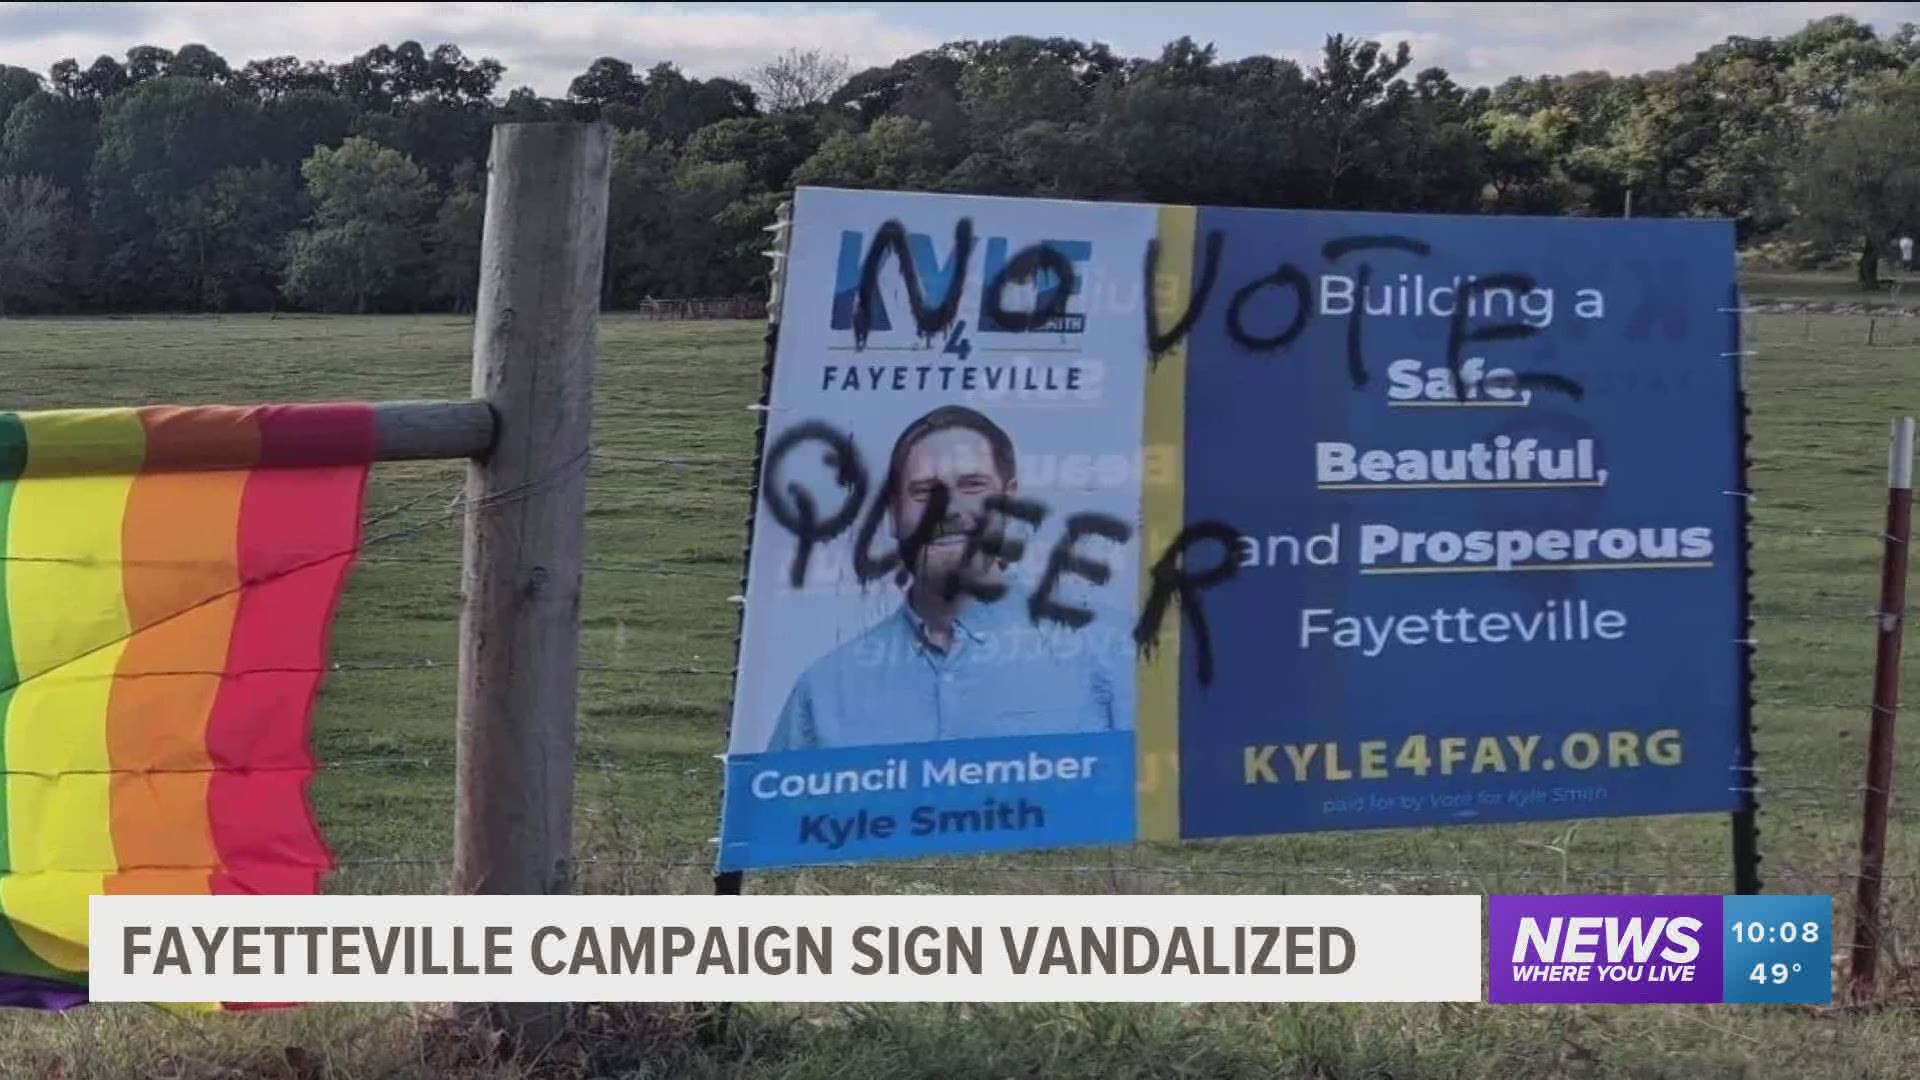 Campaign signs for Kyle Smith were vandalized in Fayetteville.